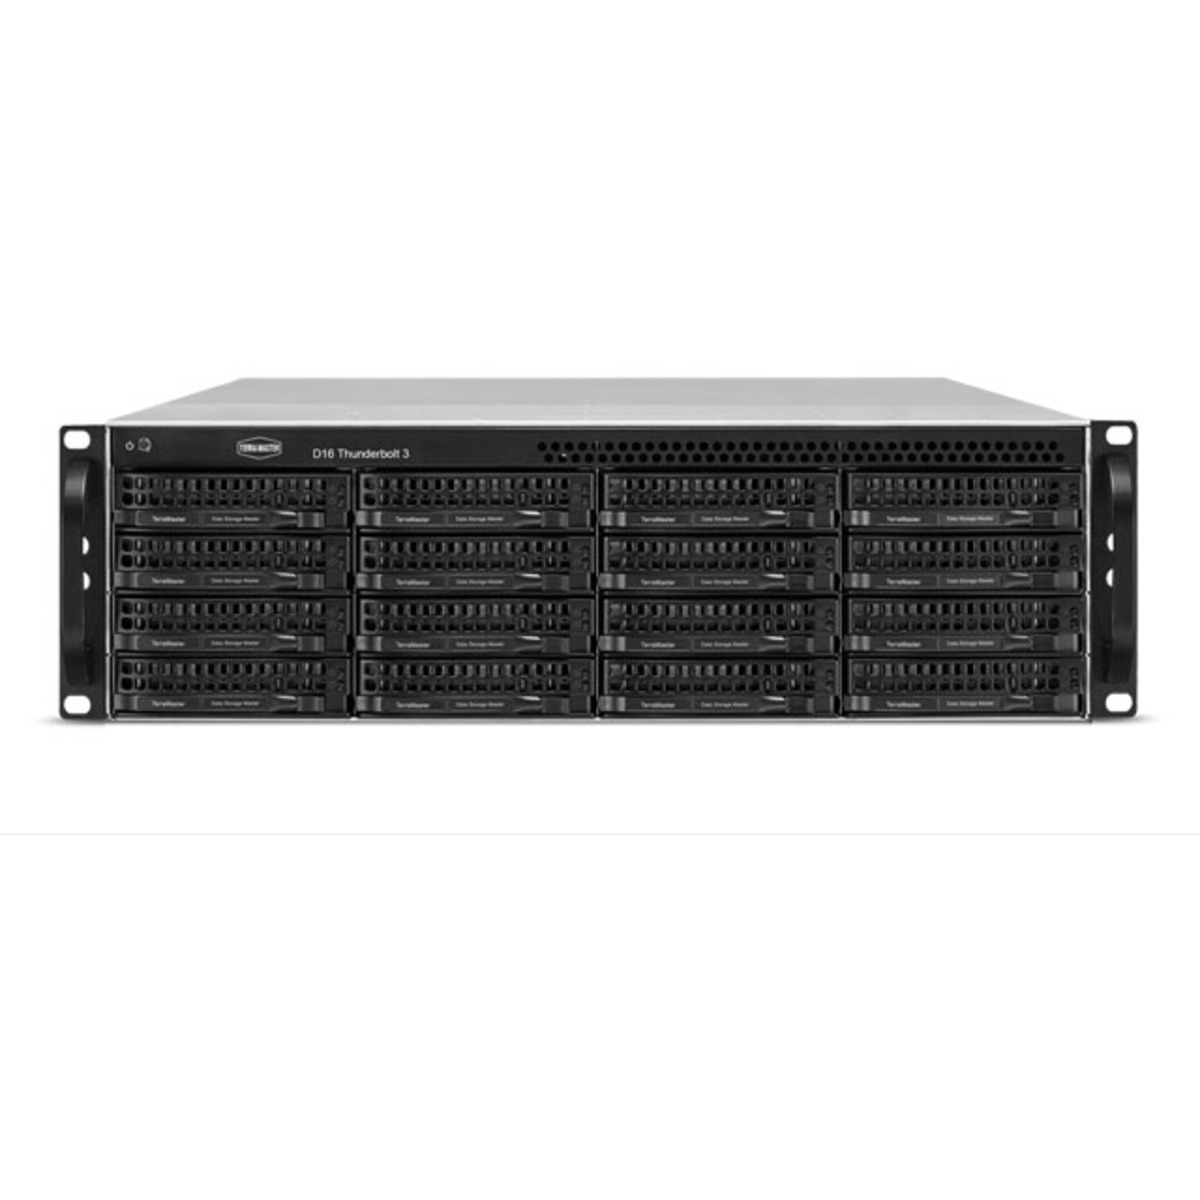 TerraMaster D16 Thunderbolt 3 26tb 16-Bay RackMount Multimedia / Power User / Business DAS - Direct Attached Storage Device 13x2tb Western Digital Gold WD2005FBYZ 3.5 7200rpm SATA 6Gb/s HDD ENTERPRISE Class Drives Installed - Burn-In Tested D16 Thunderbolt 3